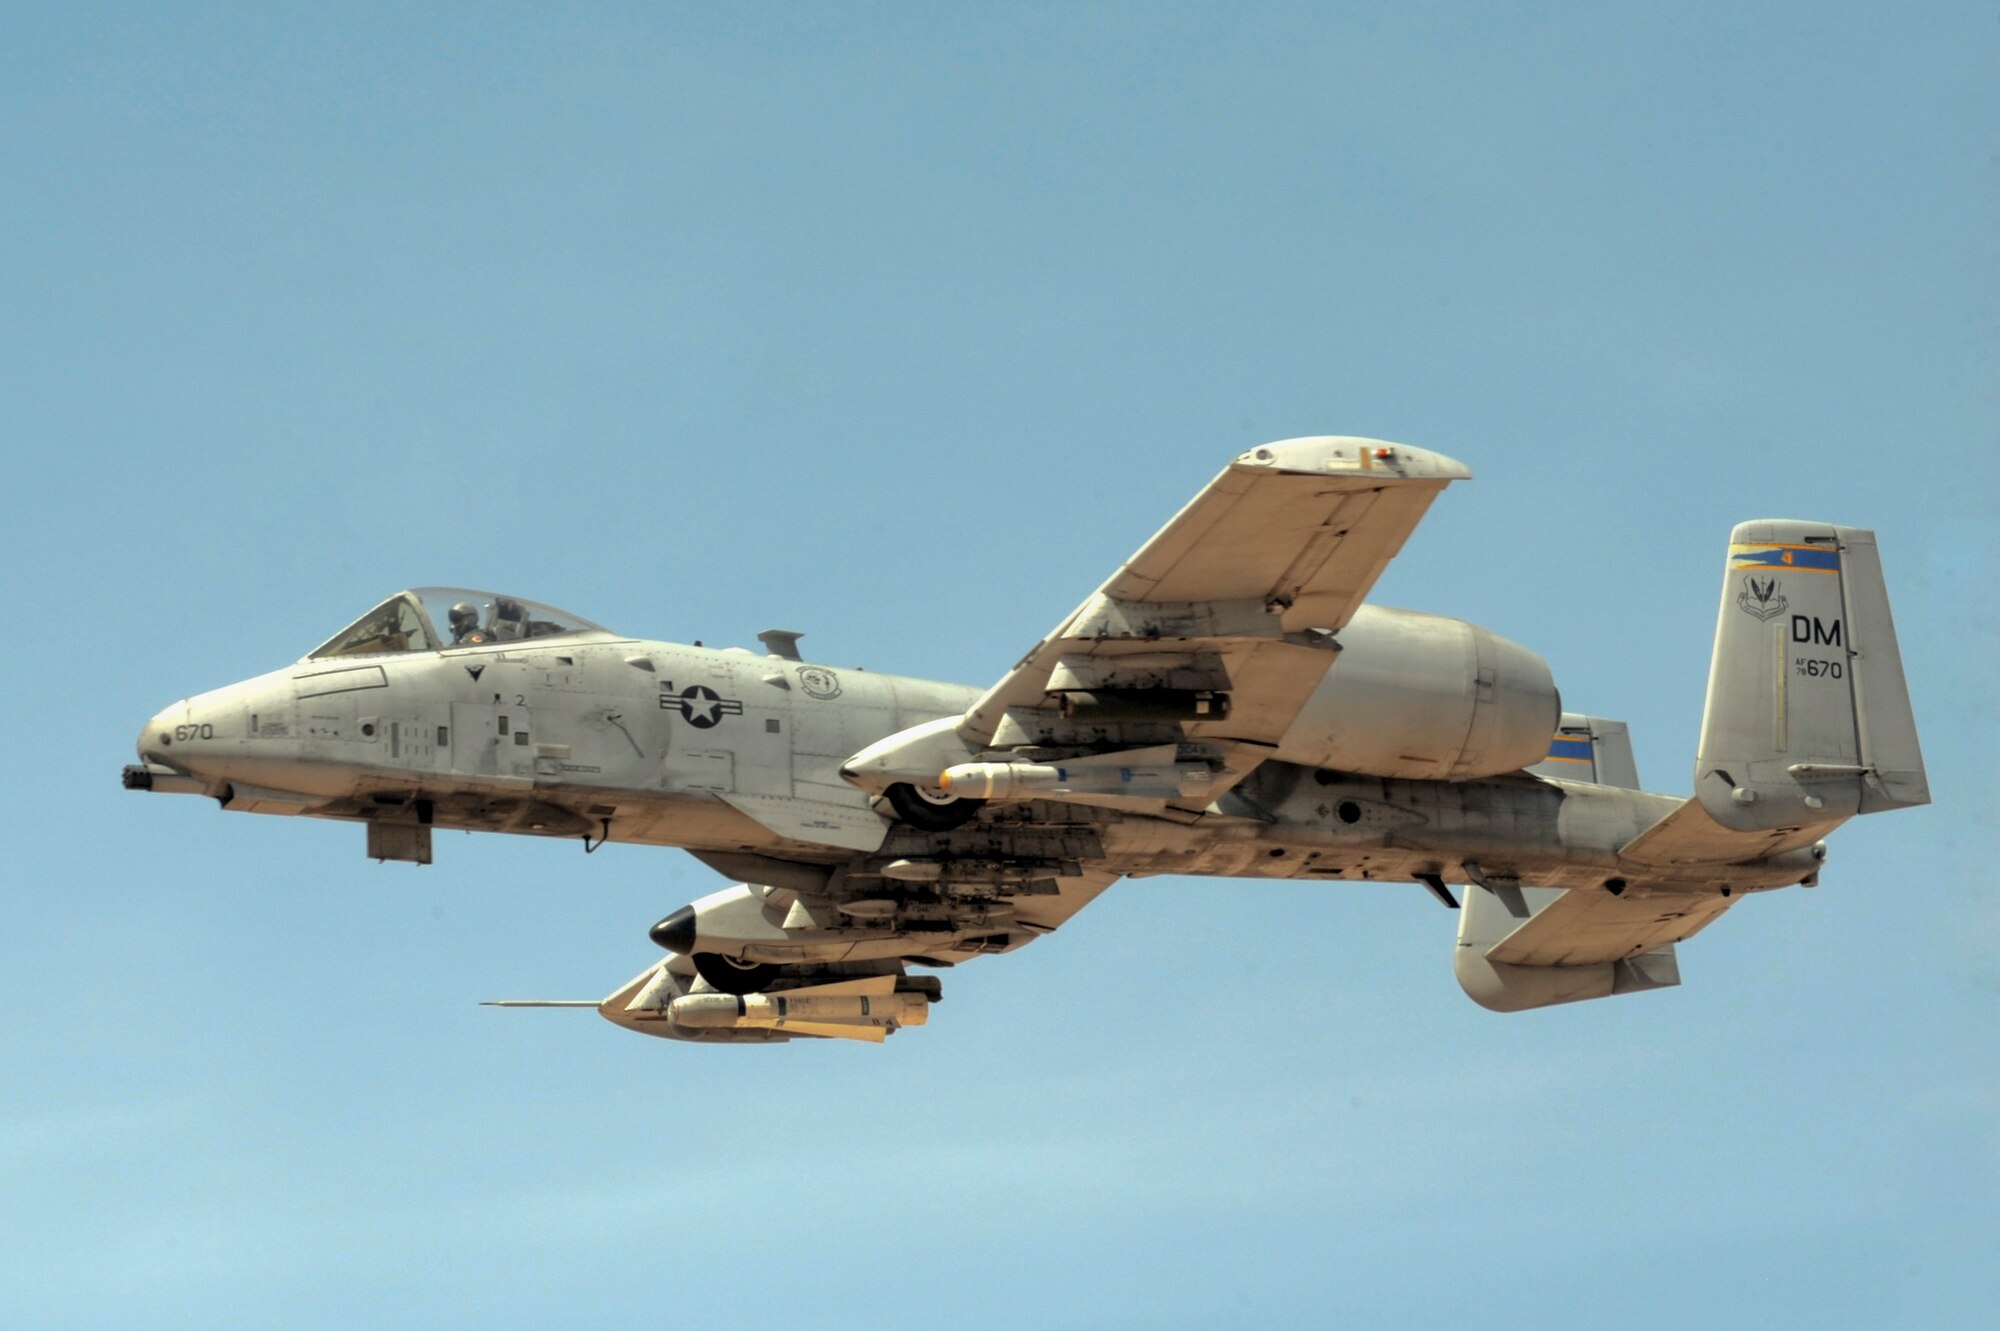 An A-10 Thunderbolt from the 354th Fighter Squadron flies through the air during a strafing run at Barry M. Goldwater Air Force Range in Wellton, Ariz., May 5, 2014. The 354th FS is sending approximately 130 individuals, from maintainers to pilots, as well as eight A-10 aircraft to Eielson Air Force Base, Alaska, to participate in a Red Flag exercise until May 23. (U.S. Air Force photo by Airman 1st Class Chris Drzazgowski/Released)